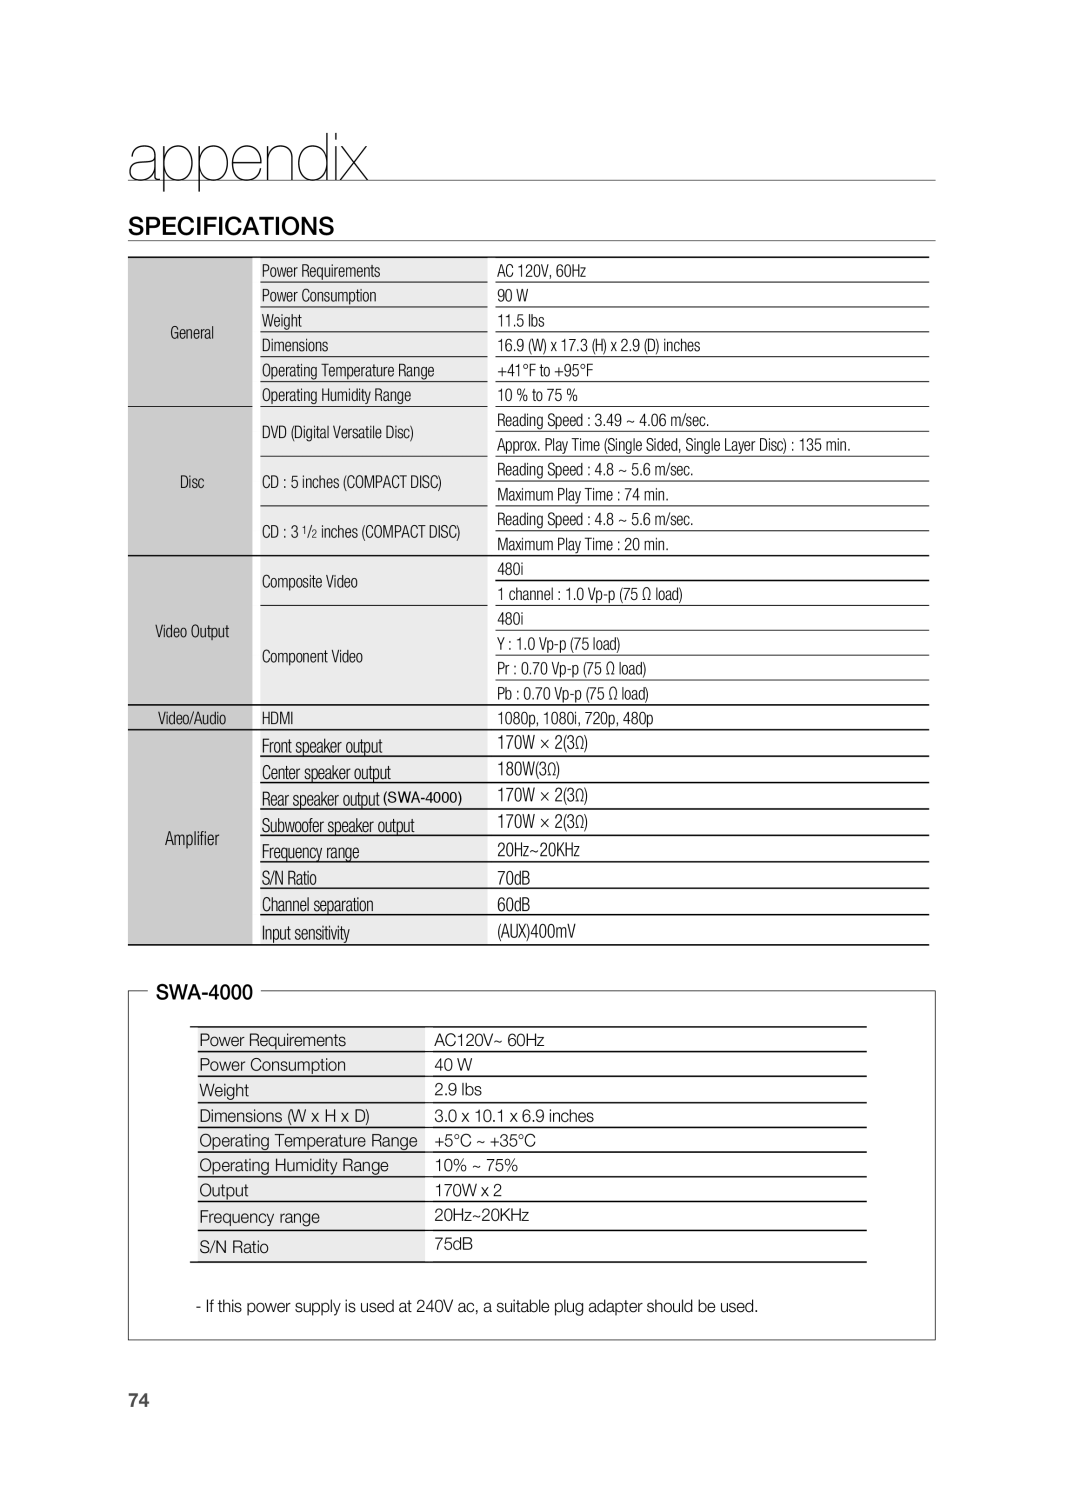 Samsung HT-Z510 manual Specifications, appendix, SWA-4000 